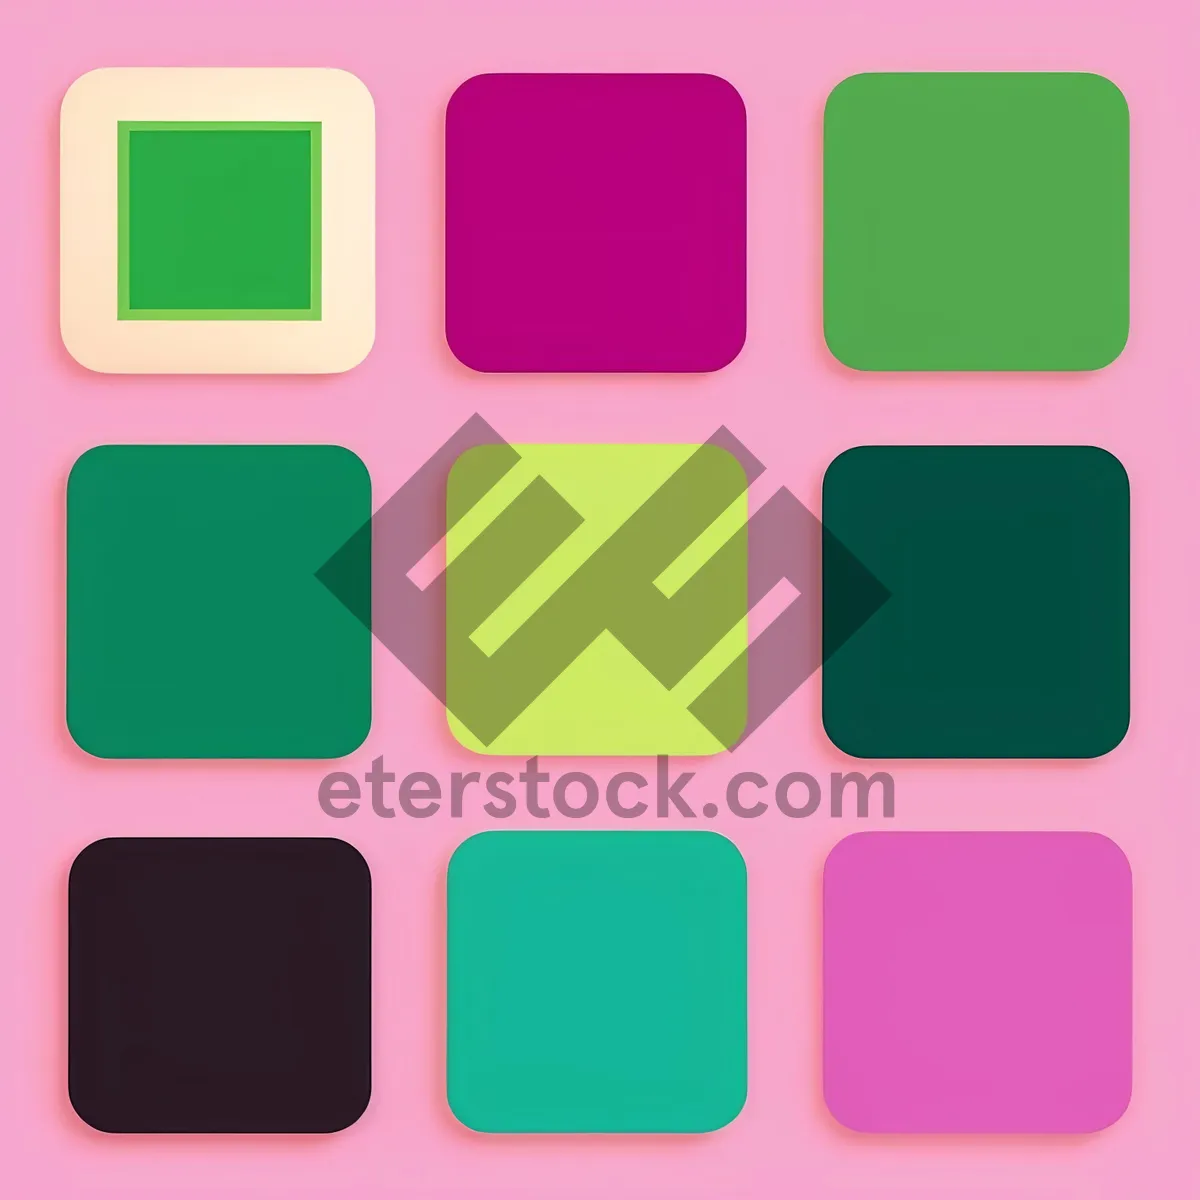 Picture of Web Button Icons Set: Sleek Square Design for Websites